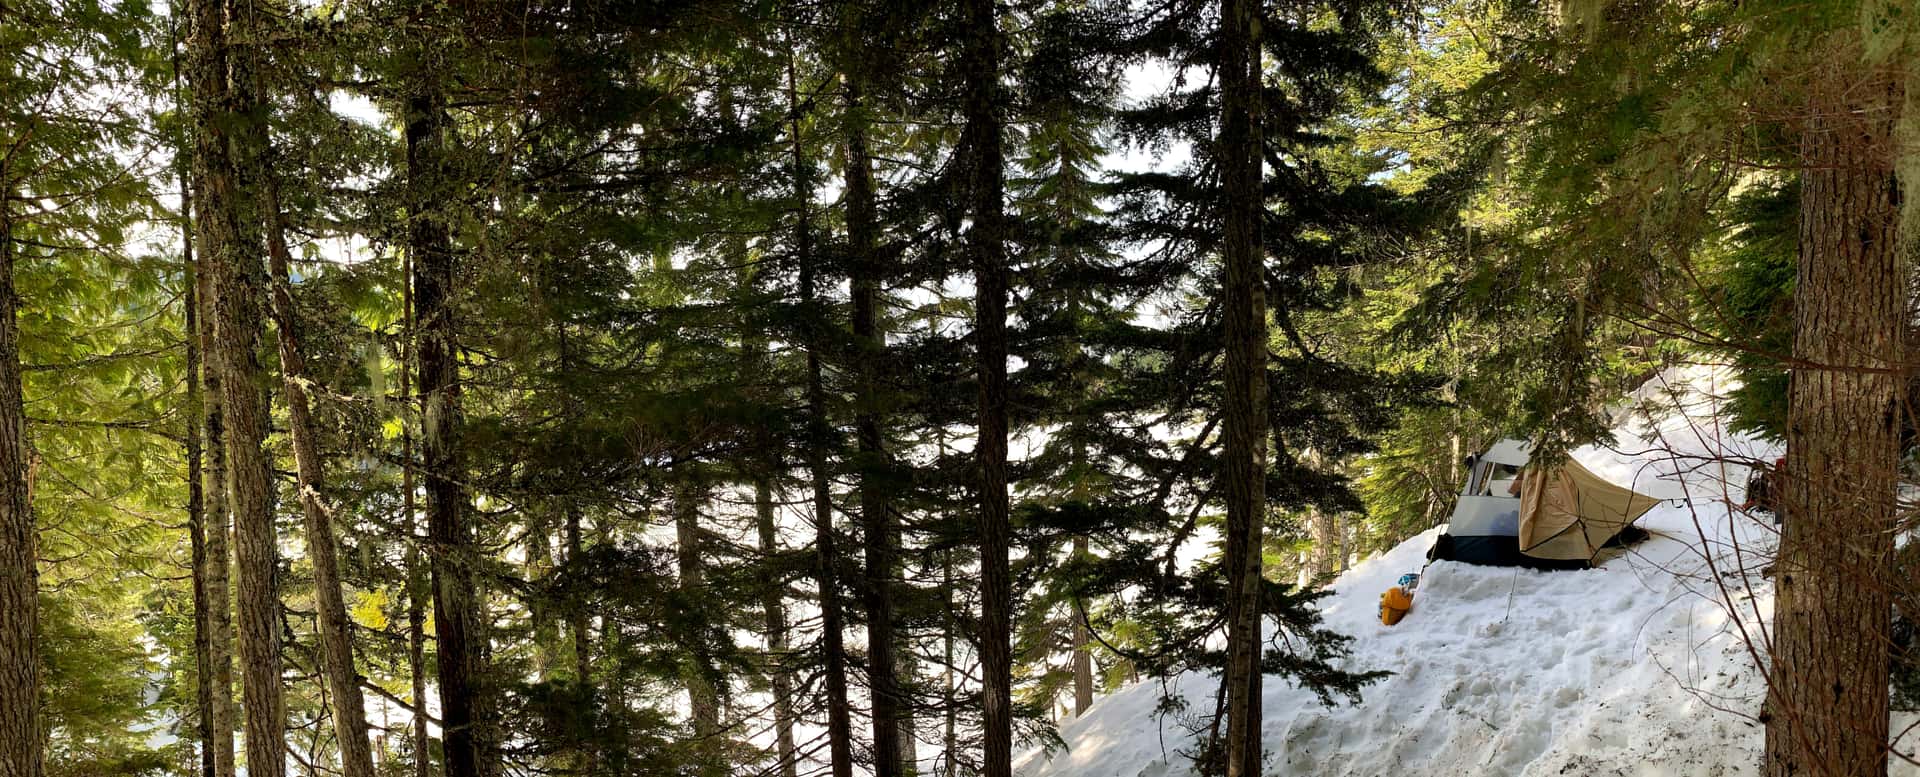 sunshine filters though evergreens onto a tent overlooking frozen Olallie Lake from a snowy hillside